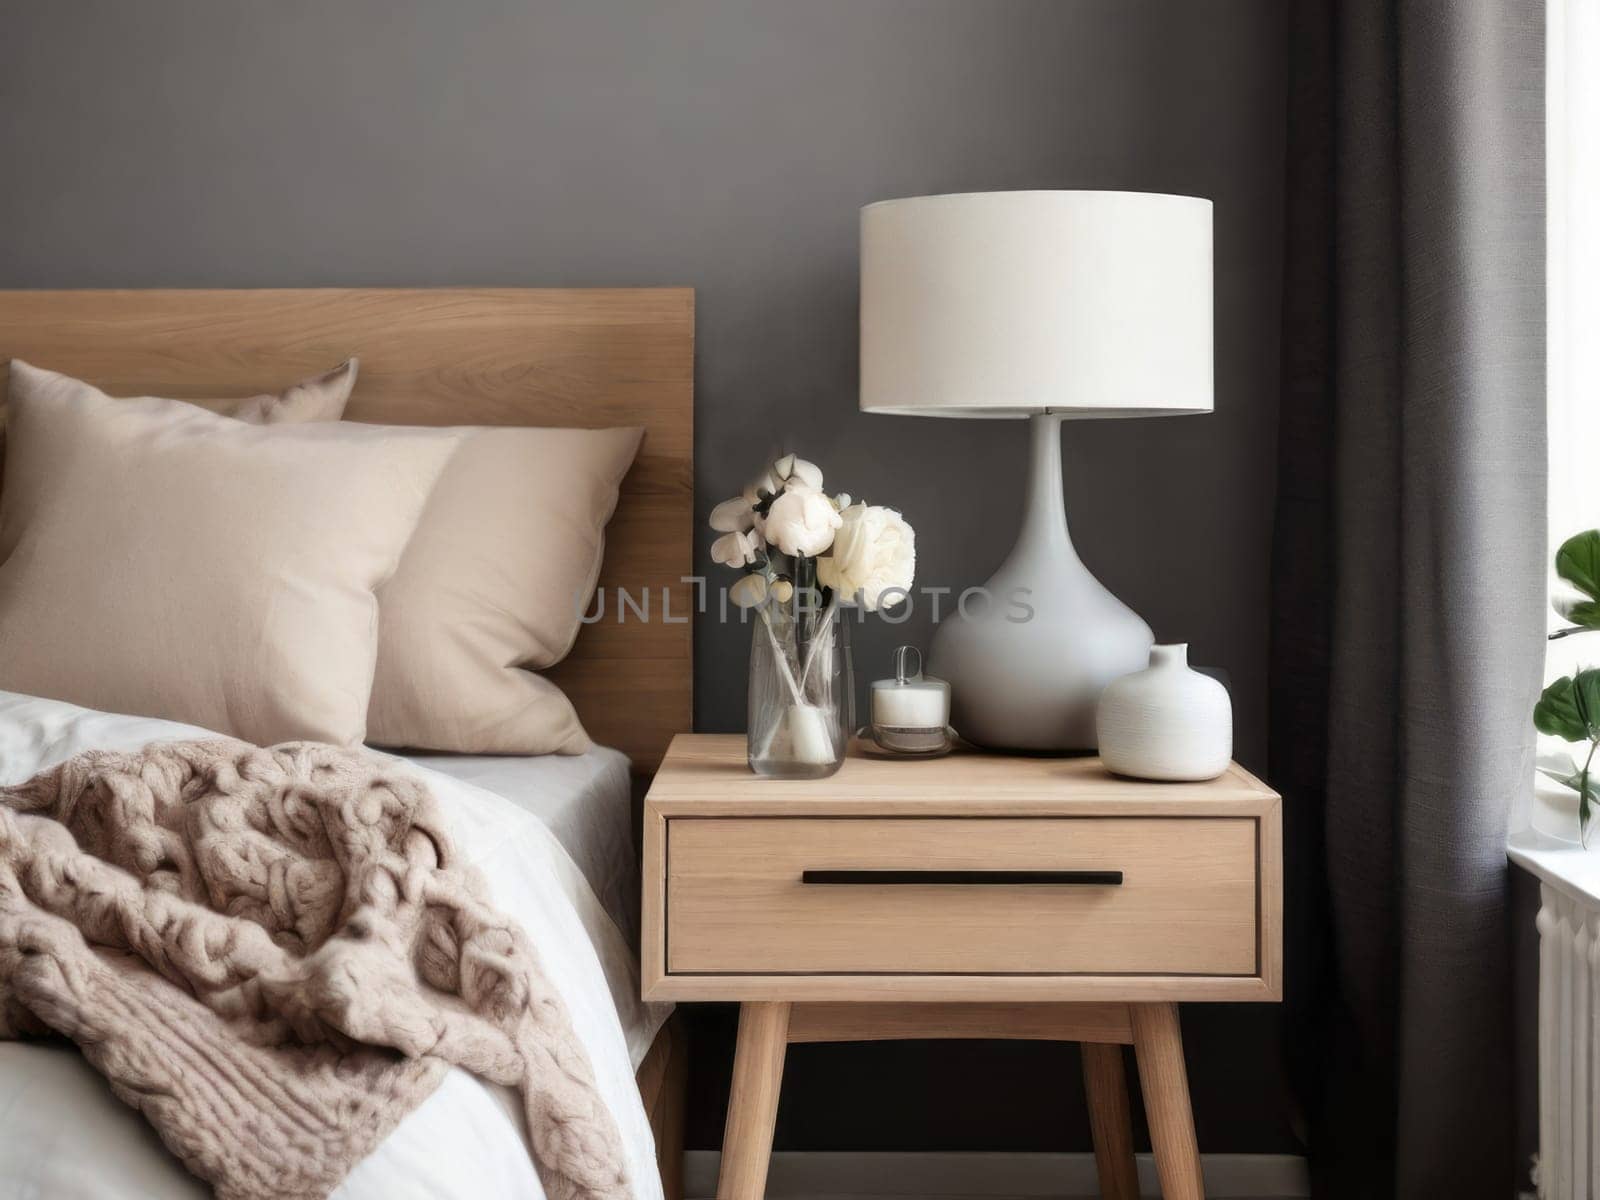 A cozy nightstand with a stylish lamp and fresh flowers, adding charm to the bedroom. Minimalist Scandinavian home interior design. by Annu1tochka